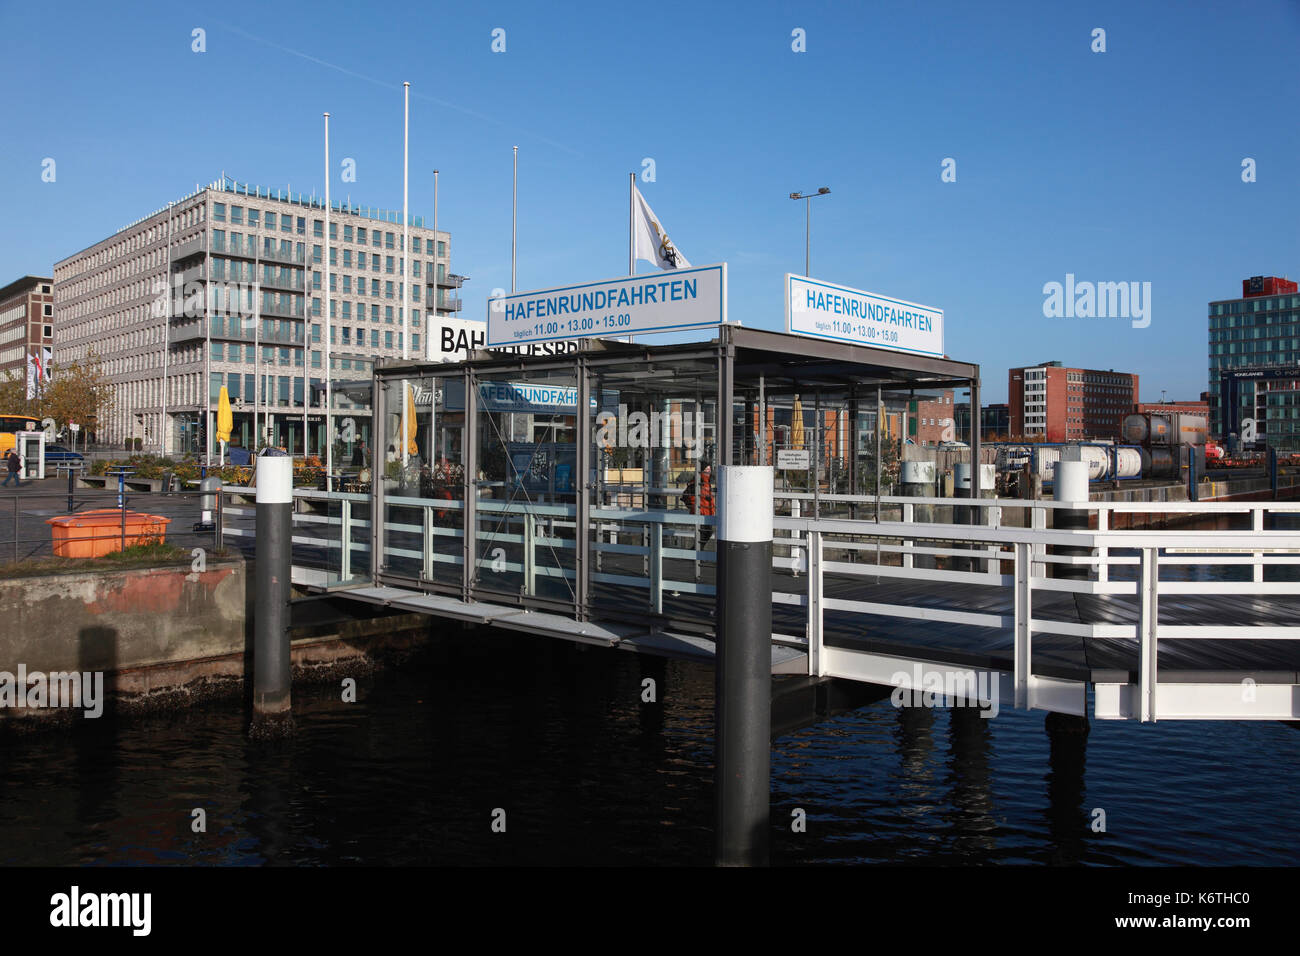 The pedestrian entrance, advertising harbour tours, leading to the footbridge to the Color Line ferry terminal in Kiel Stock Photo